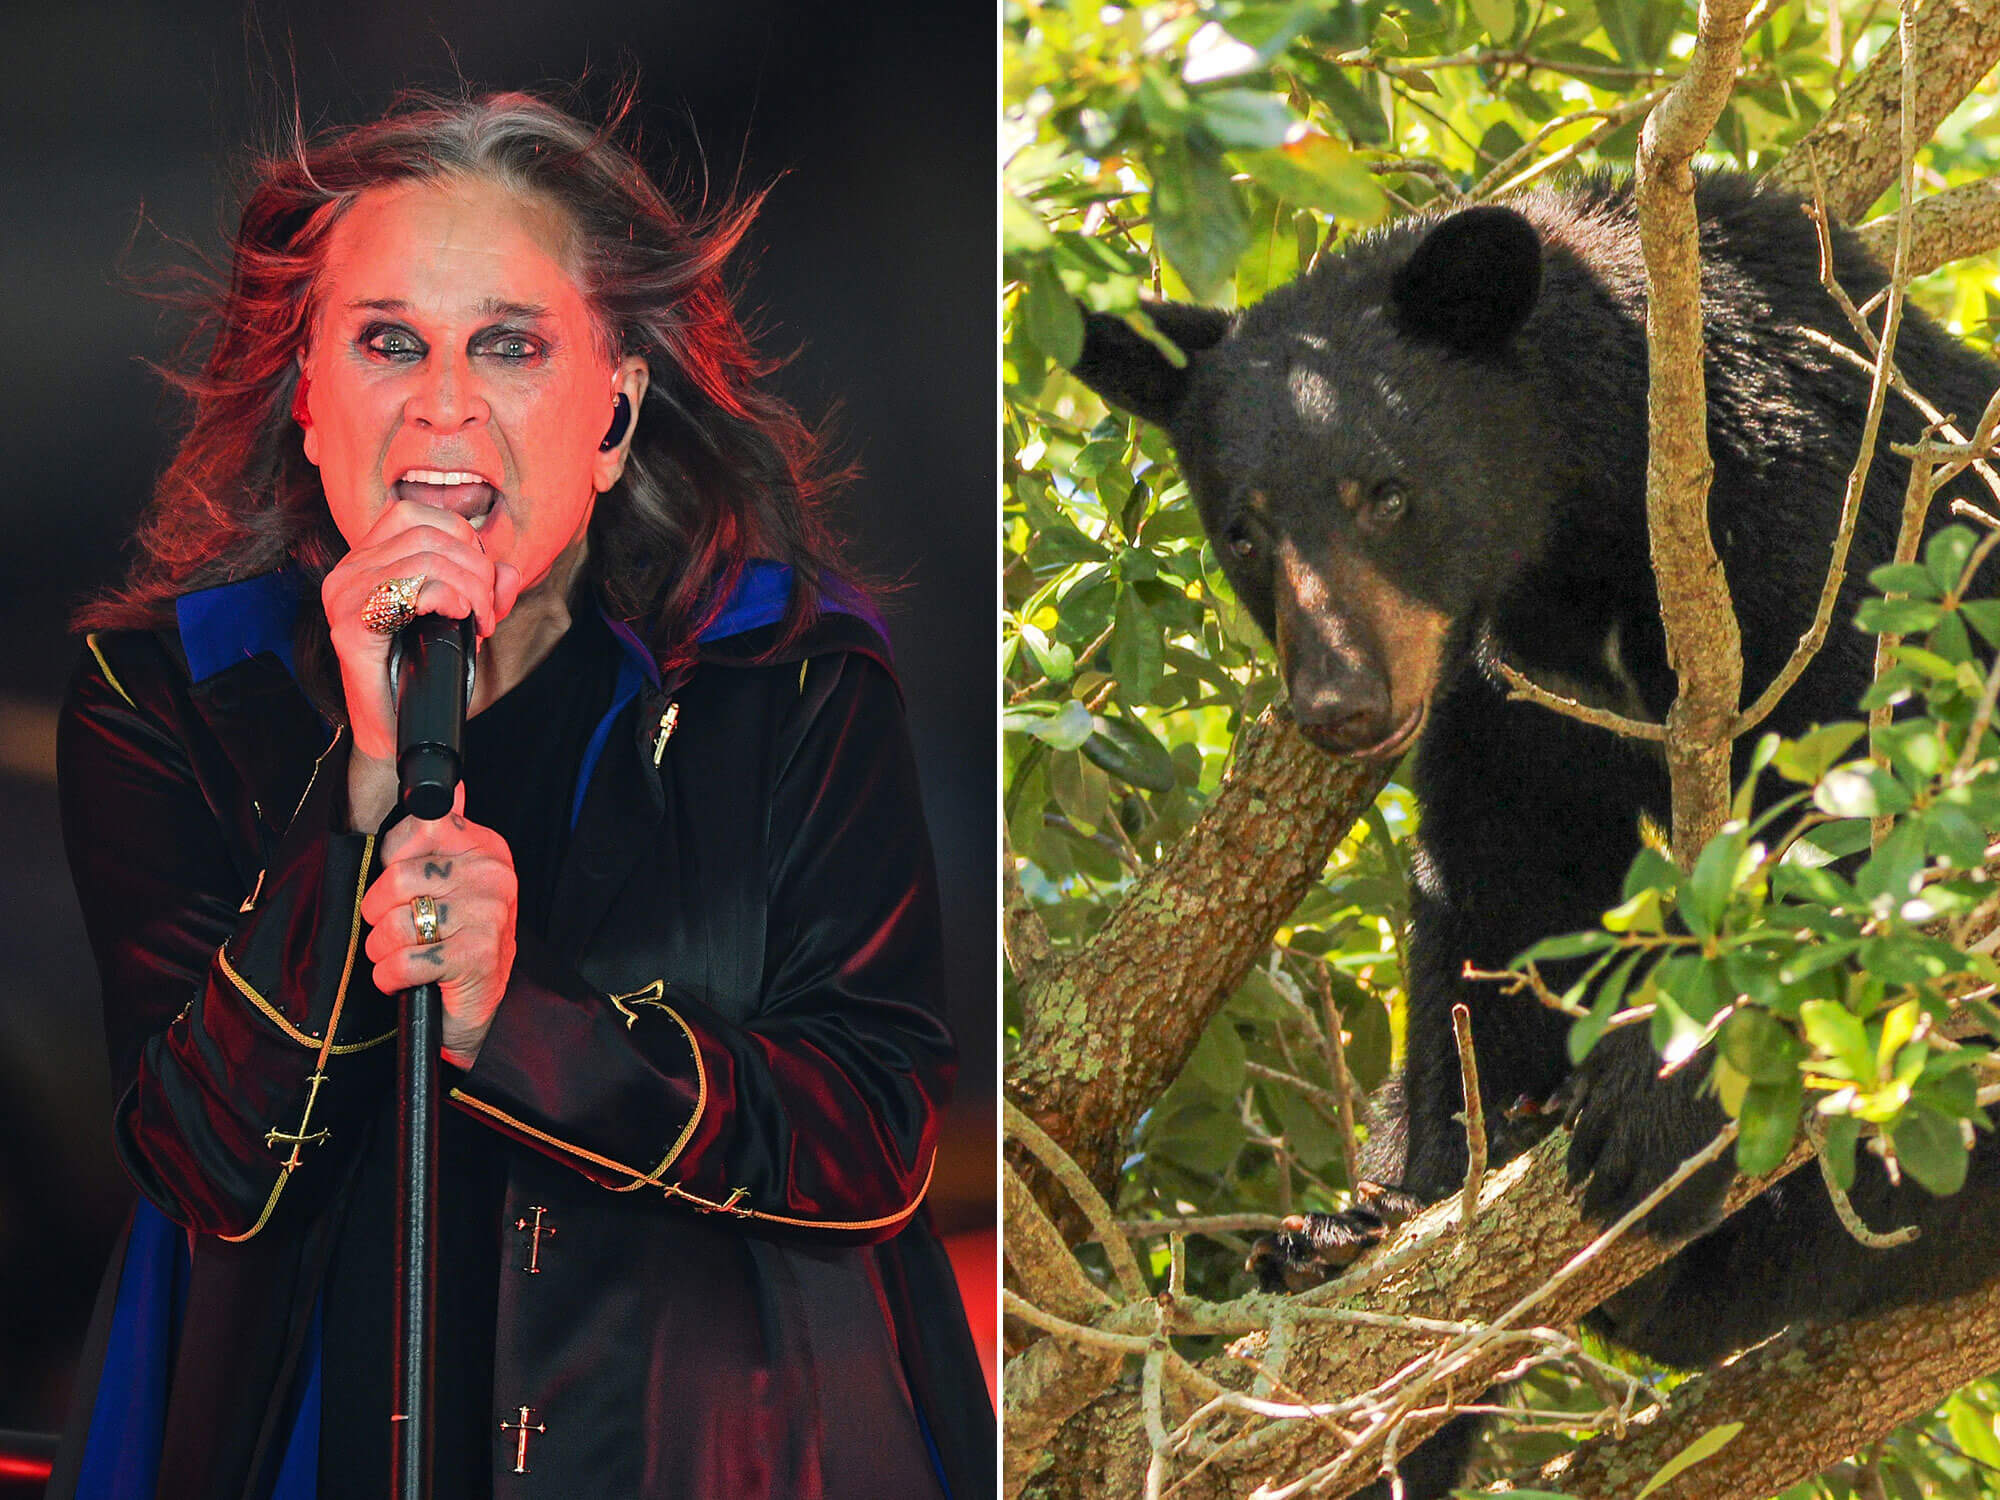 [L-R] Ozzy Osbourne and a black bear in a tree